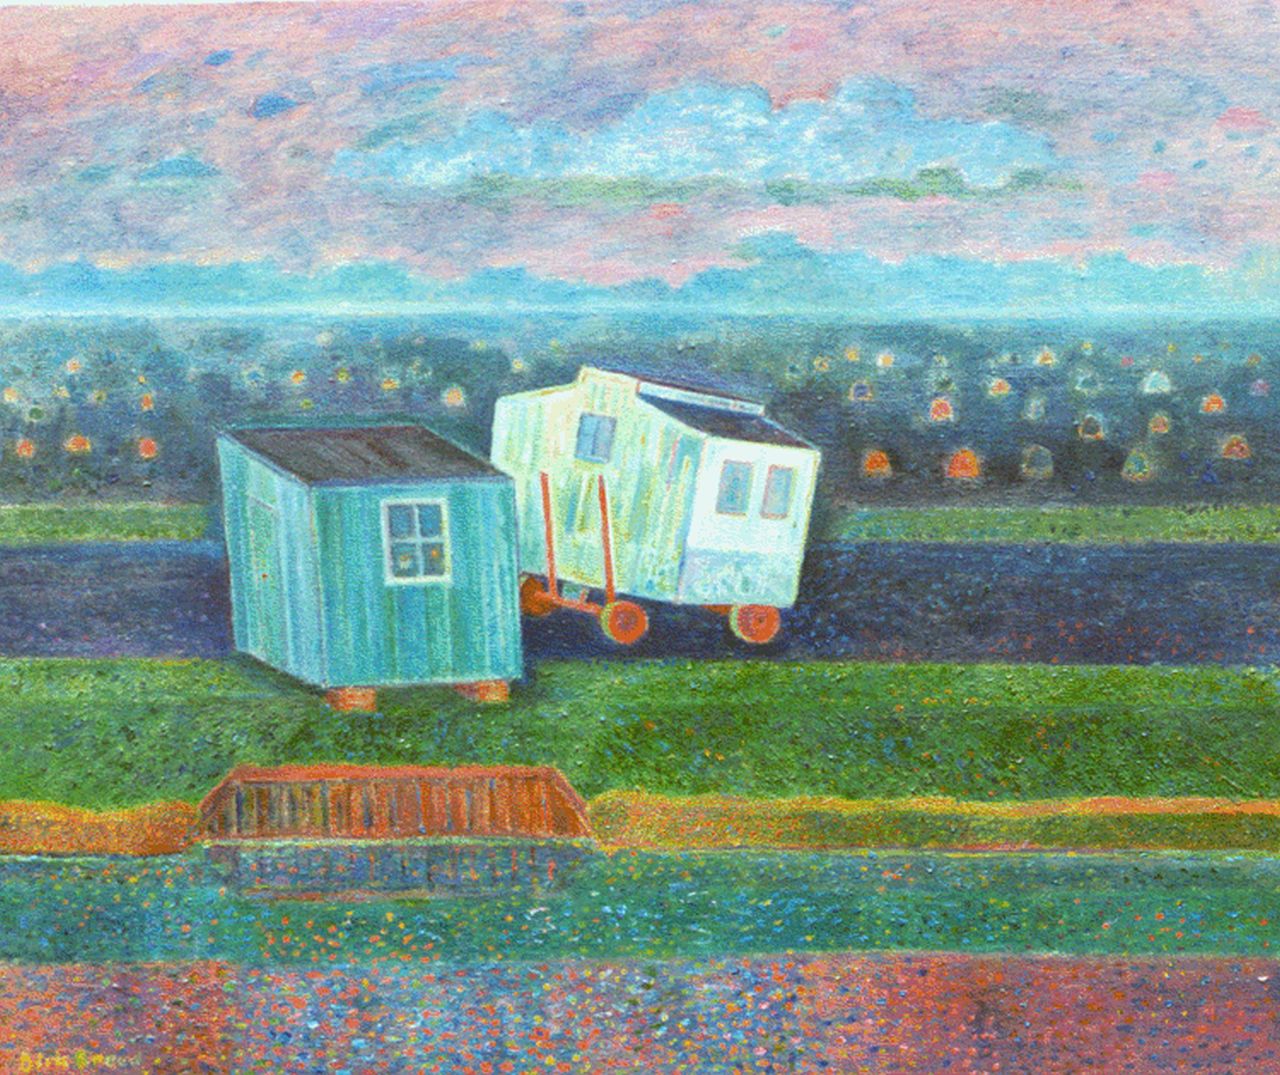 Breed D.C.  | 'Dirk' Cornelis Breed, Caravans in a landscape, oil on canvas 50.2 x 59.9 cm, signed l.l. and on the reverse